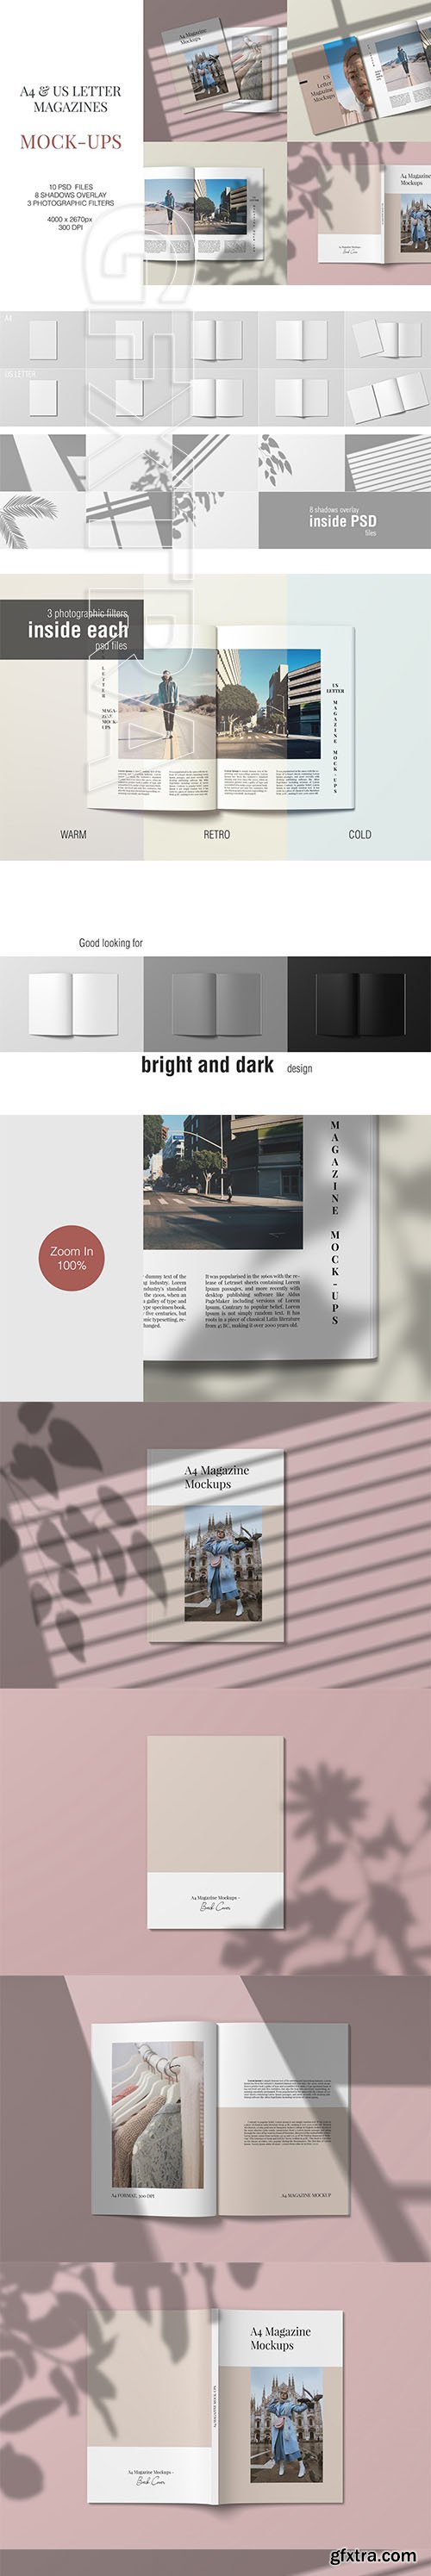 CreativeMarket - A4 and US Letter Magazine Mockups 3710369